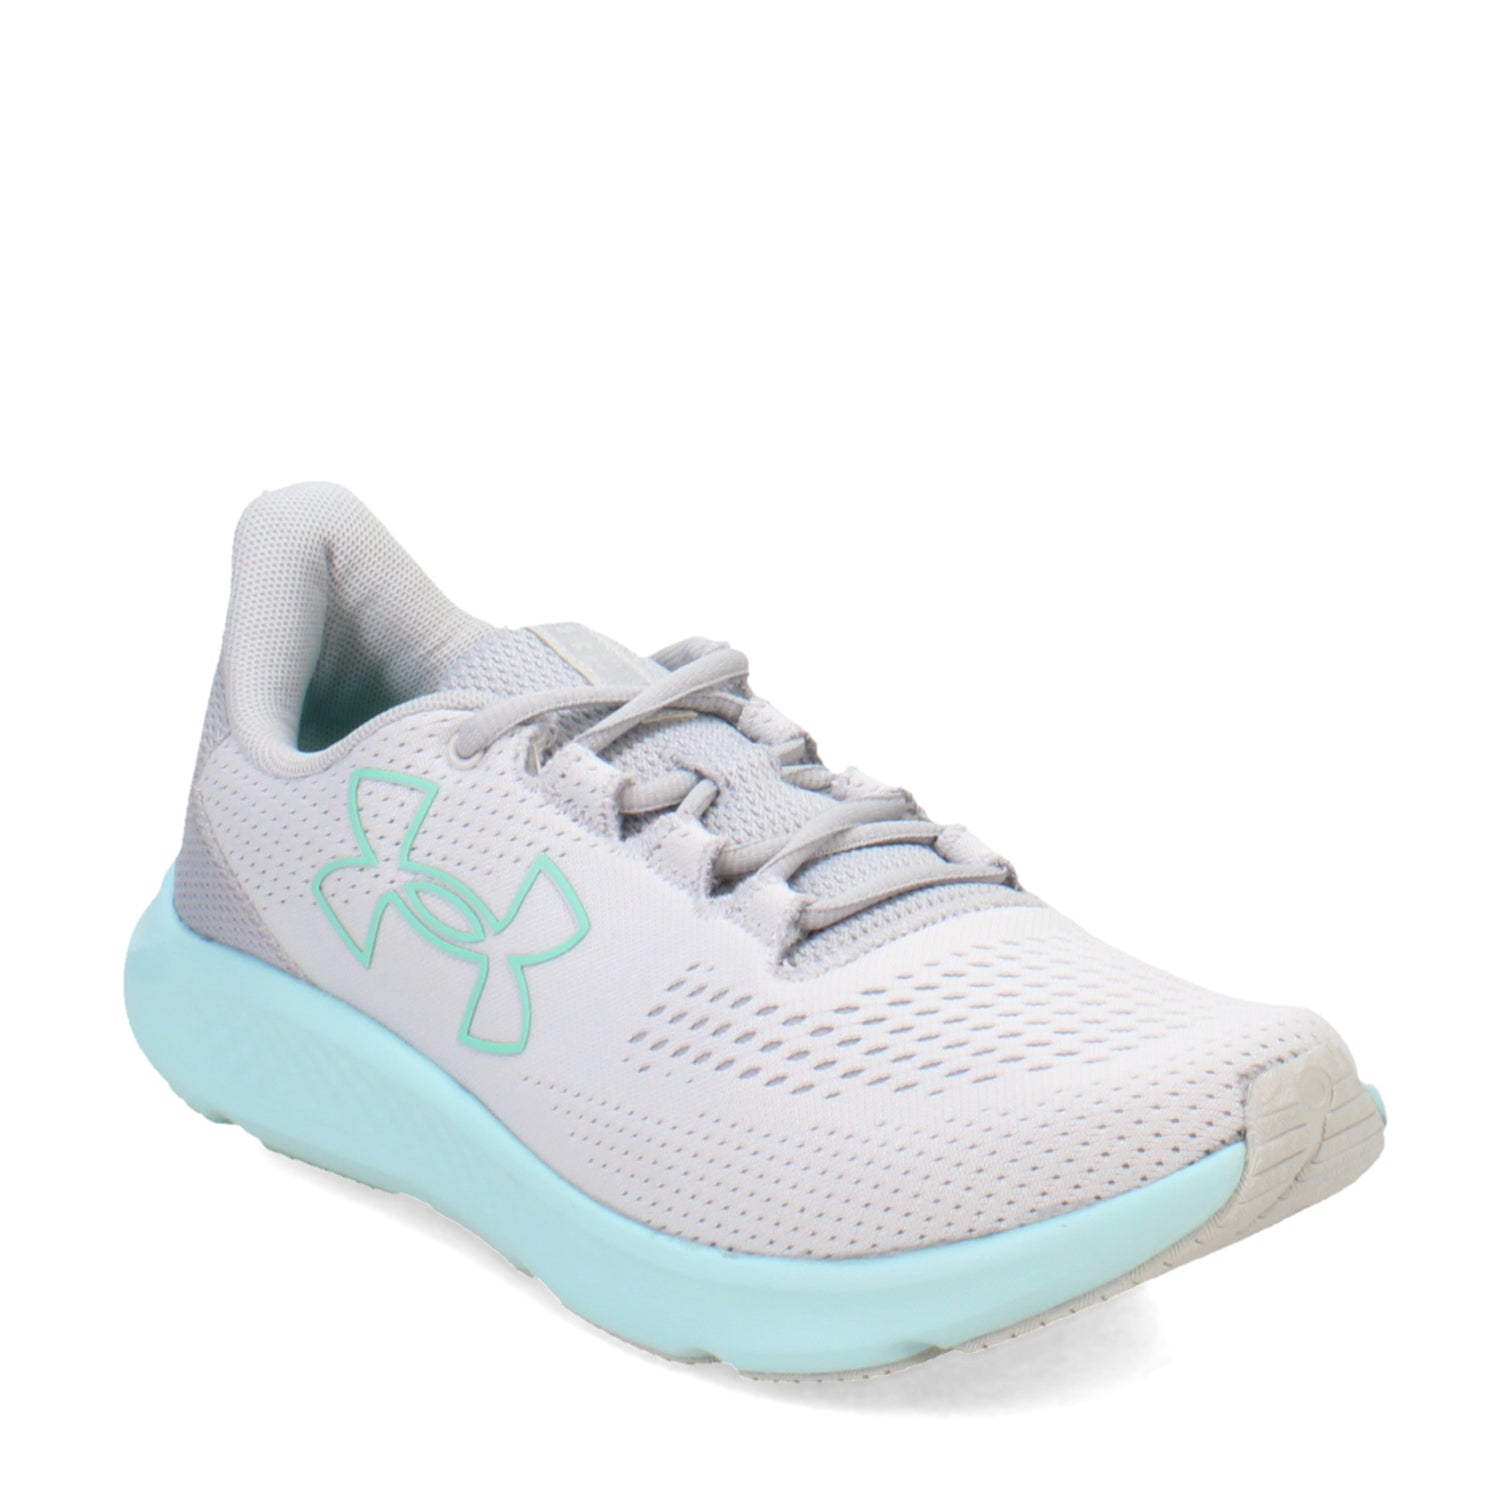 Under Armour Charged Pursuit 3 BL UA White Grey Women Running Shoes  3026523-101 